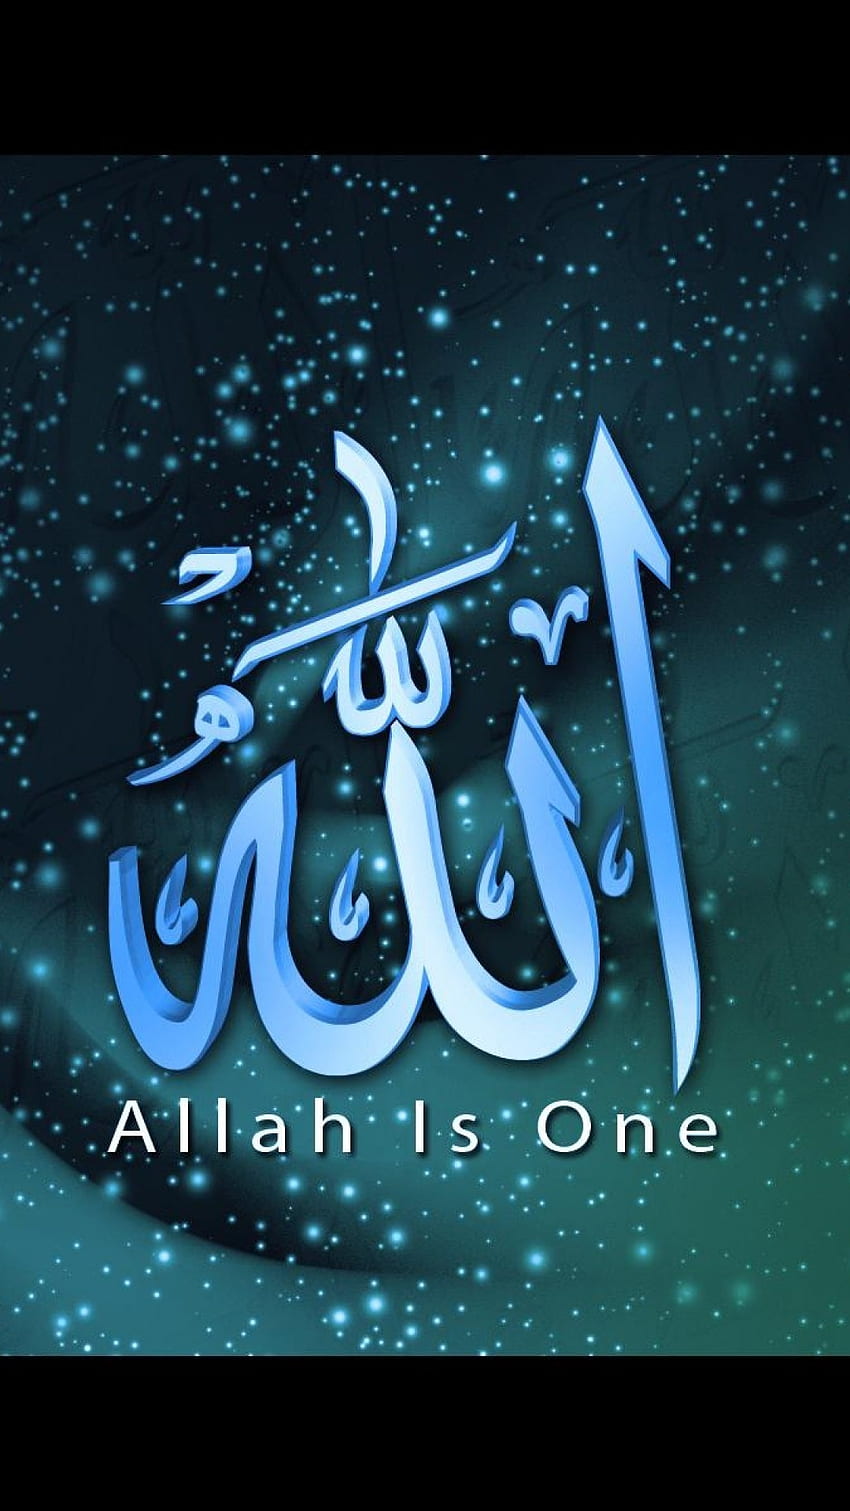 Amazing Collection of Over 999+ HD Images of Allah, Including Full 4K ...